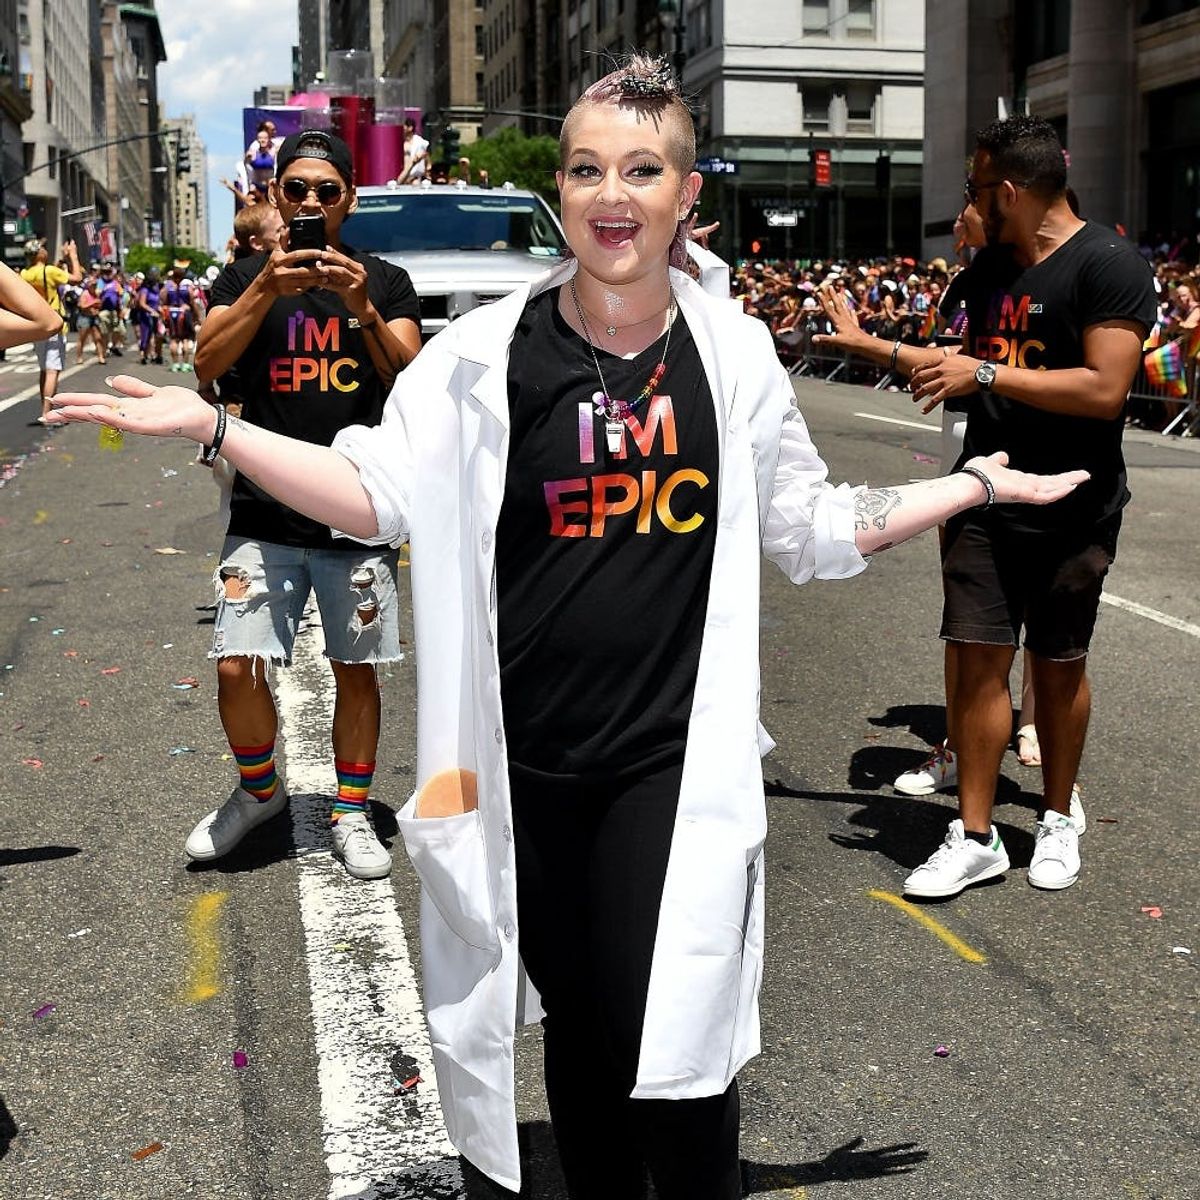 Kelly Osbourne Peed Her Pants at NY’s Pride Parade and Is Blaming Starbucks